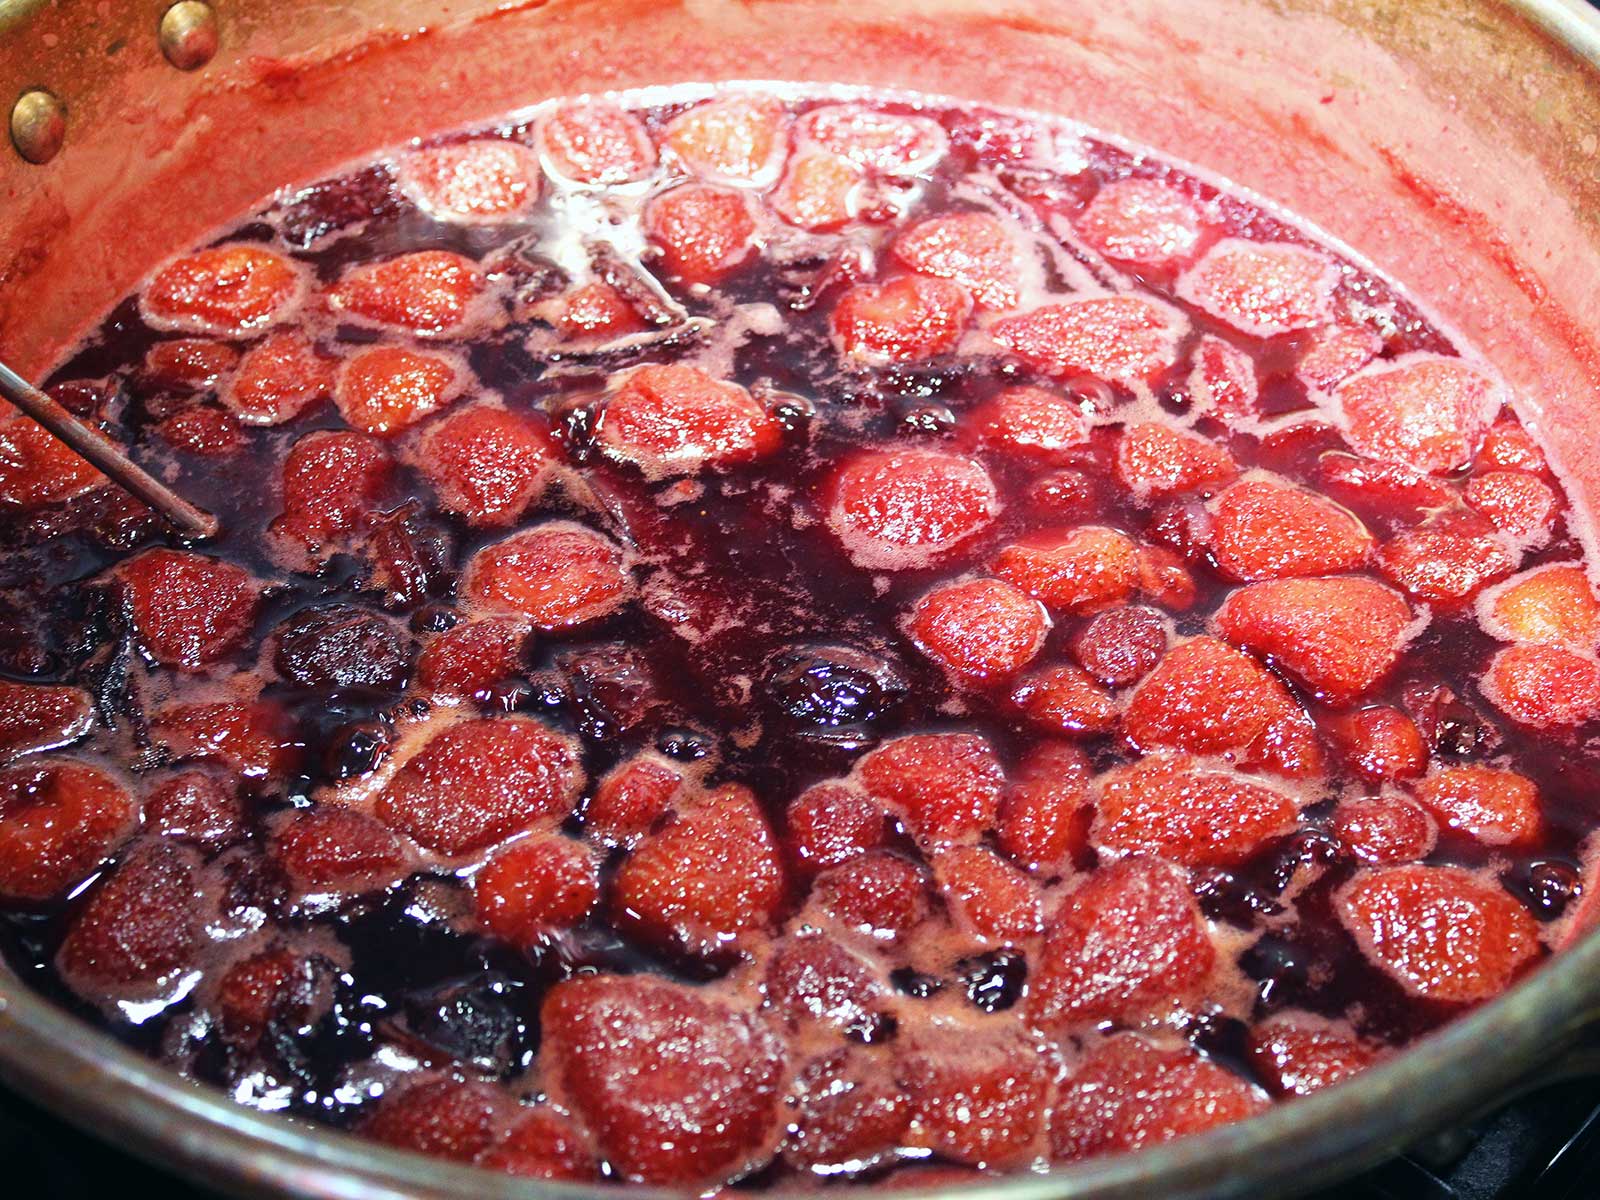 Strawberries and Pluots cooking in copper pan